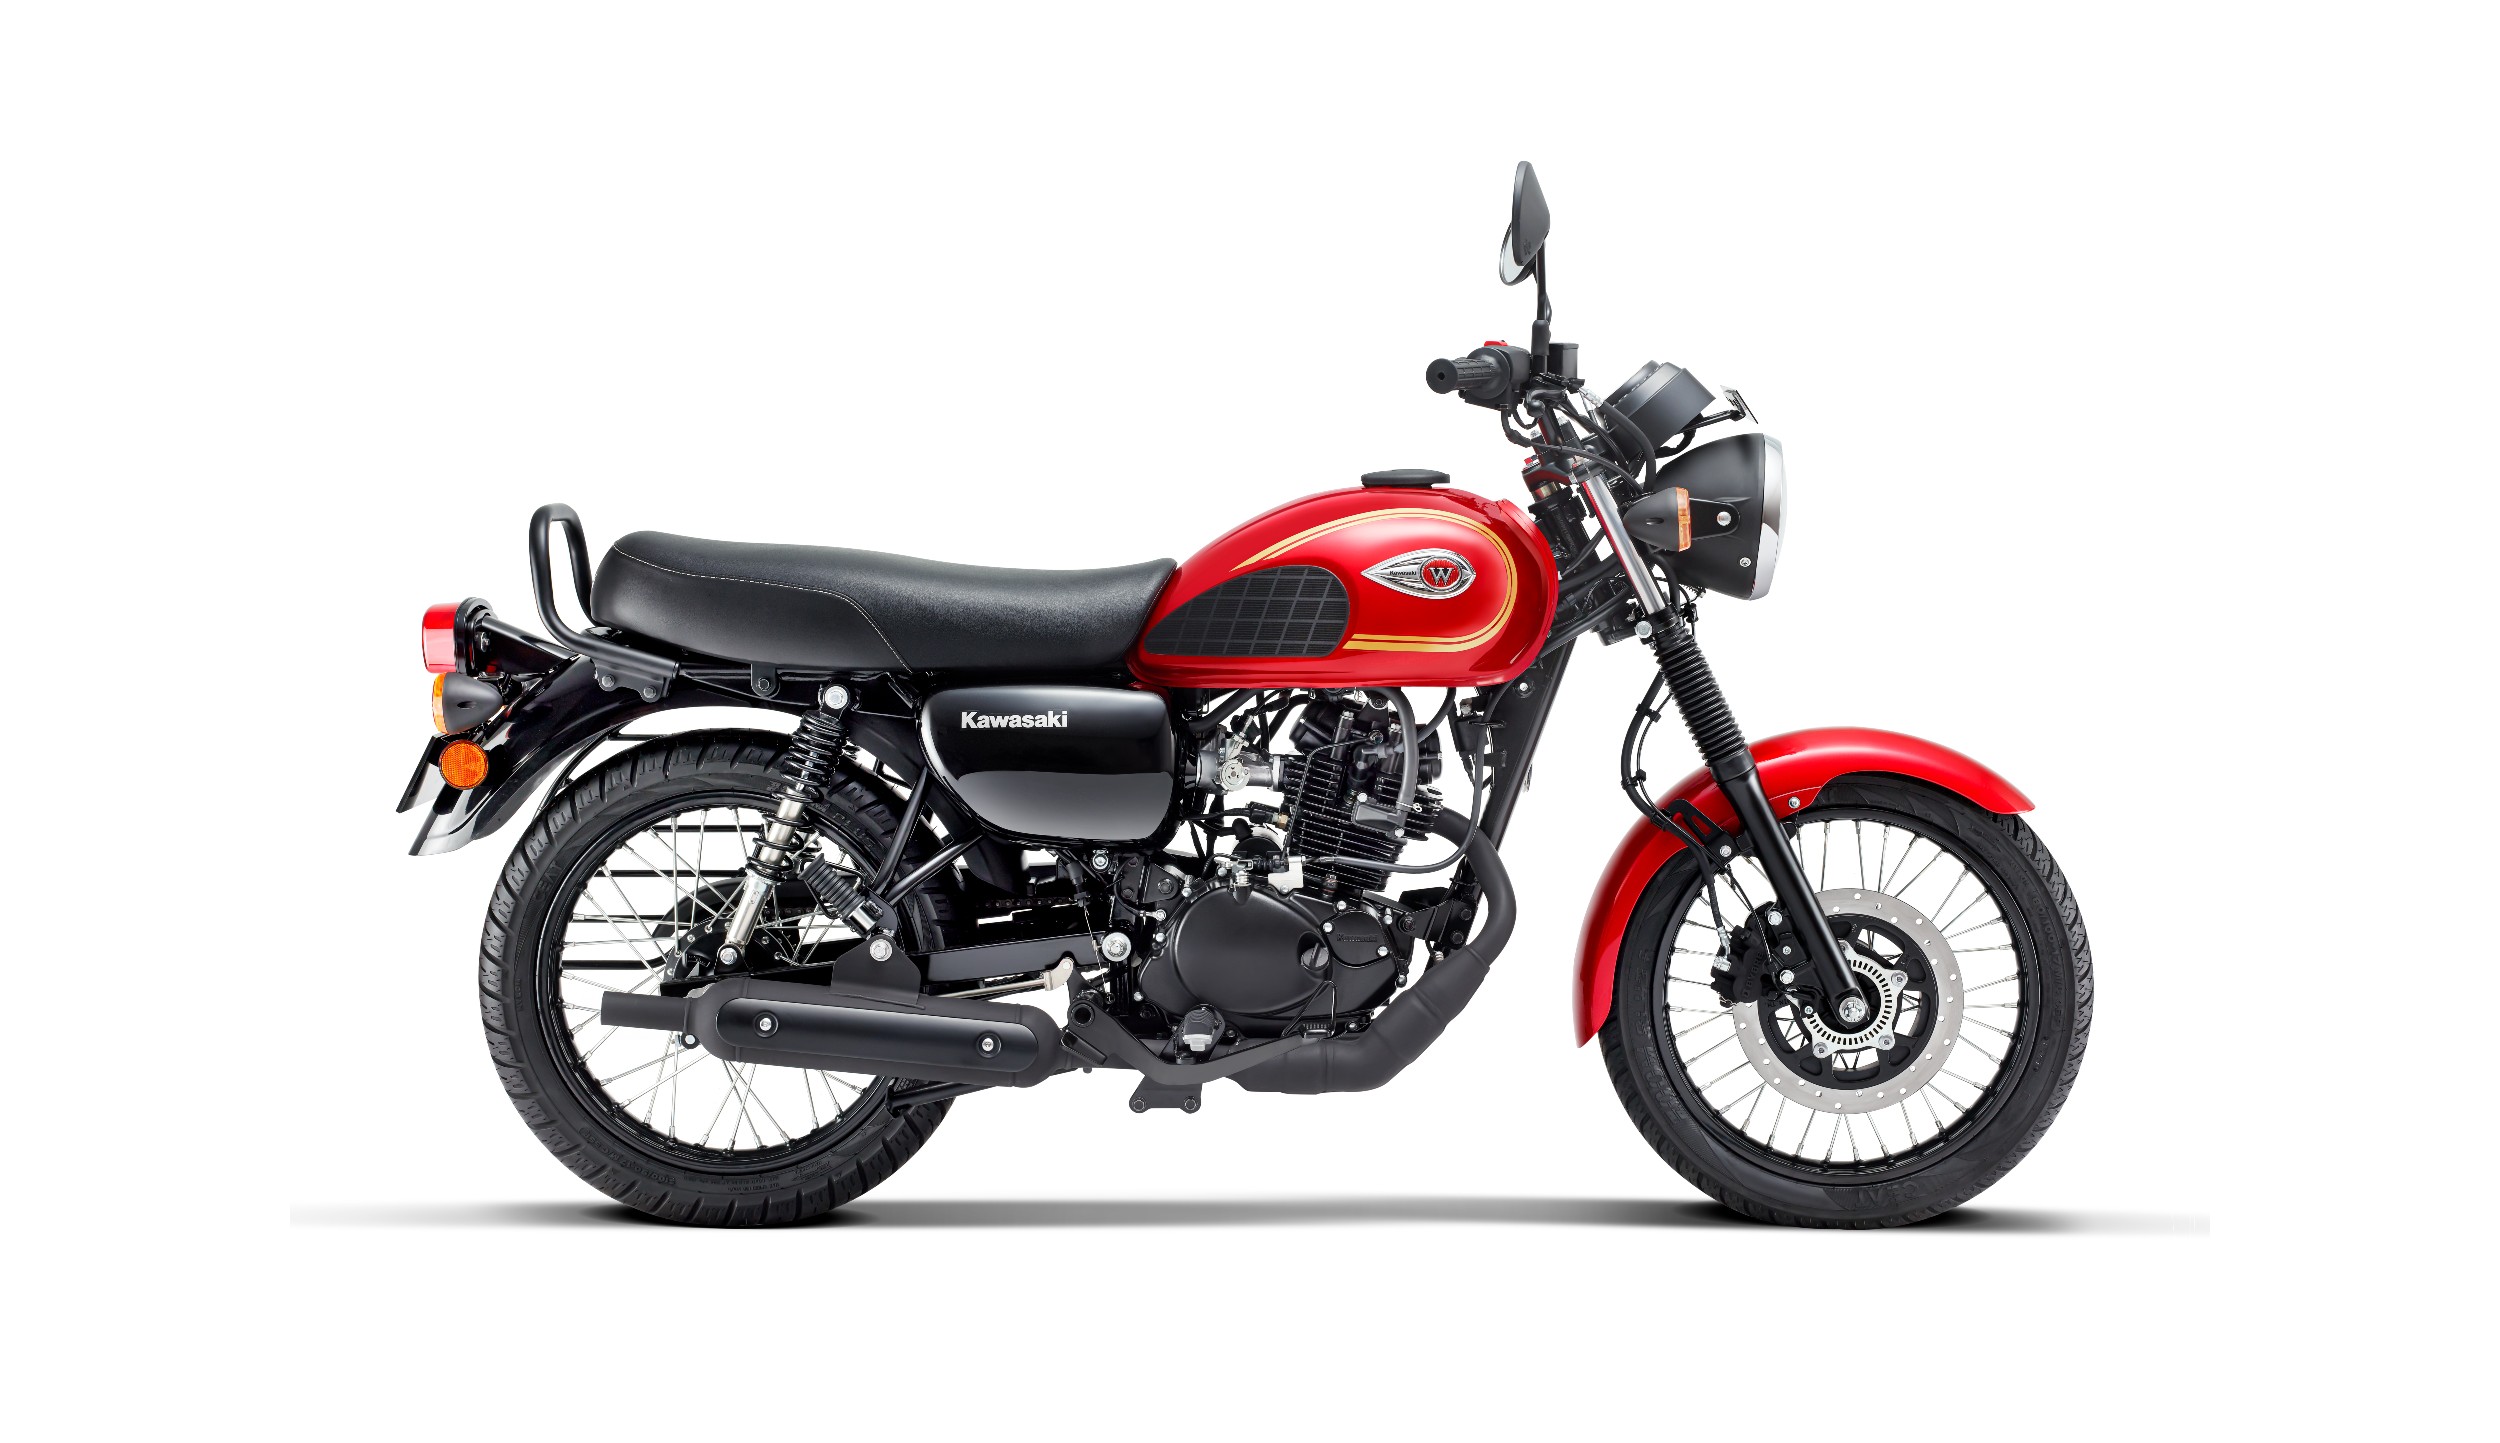 The W175 draws power from a 177 cc single-cylinder air-cooled motor